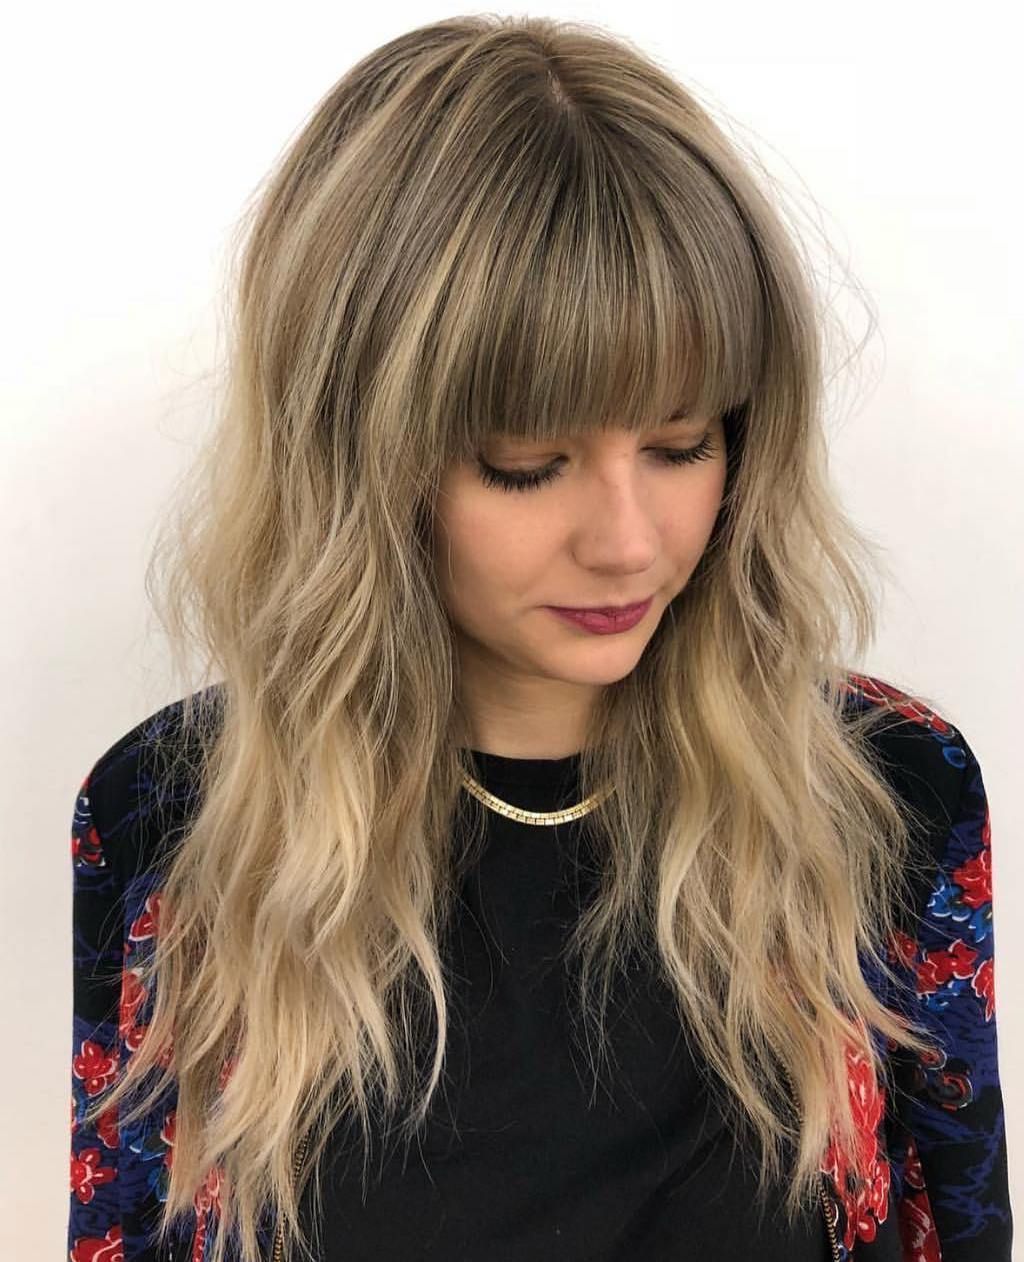 Fashionable Long Straight Layered Hairstyles With Fringes Regarding 35 Instagram Popular Ways To Pull Off Long Hair With Bangs (View 13 of 20)